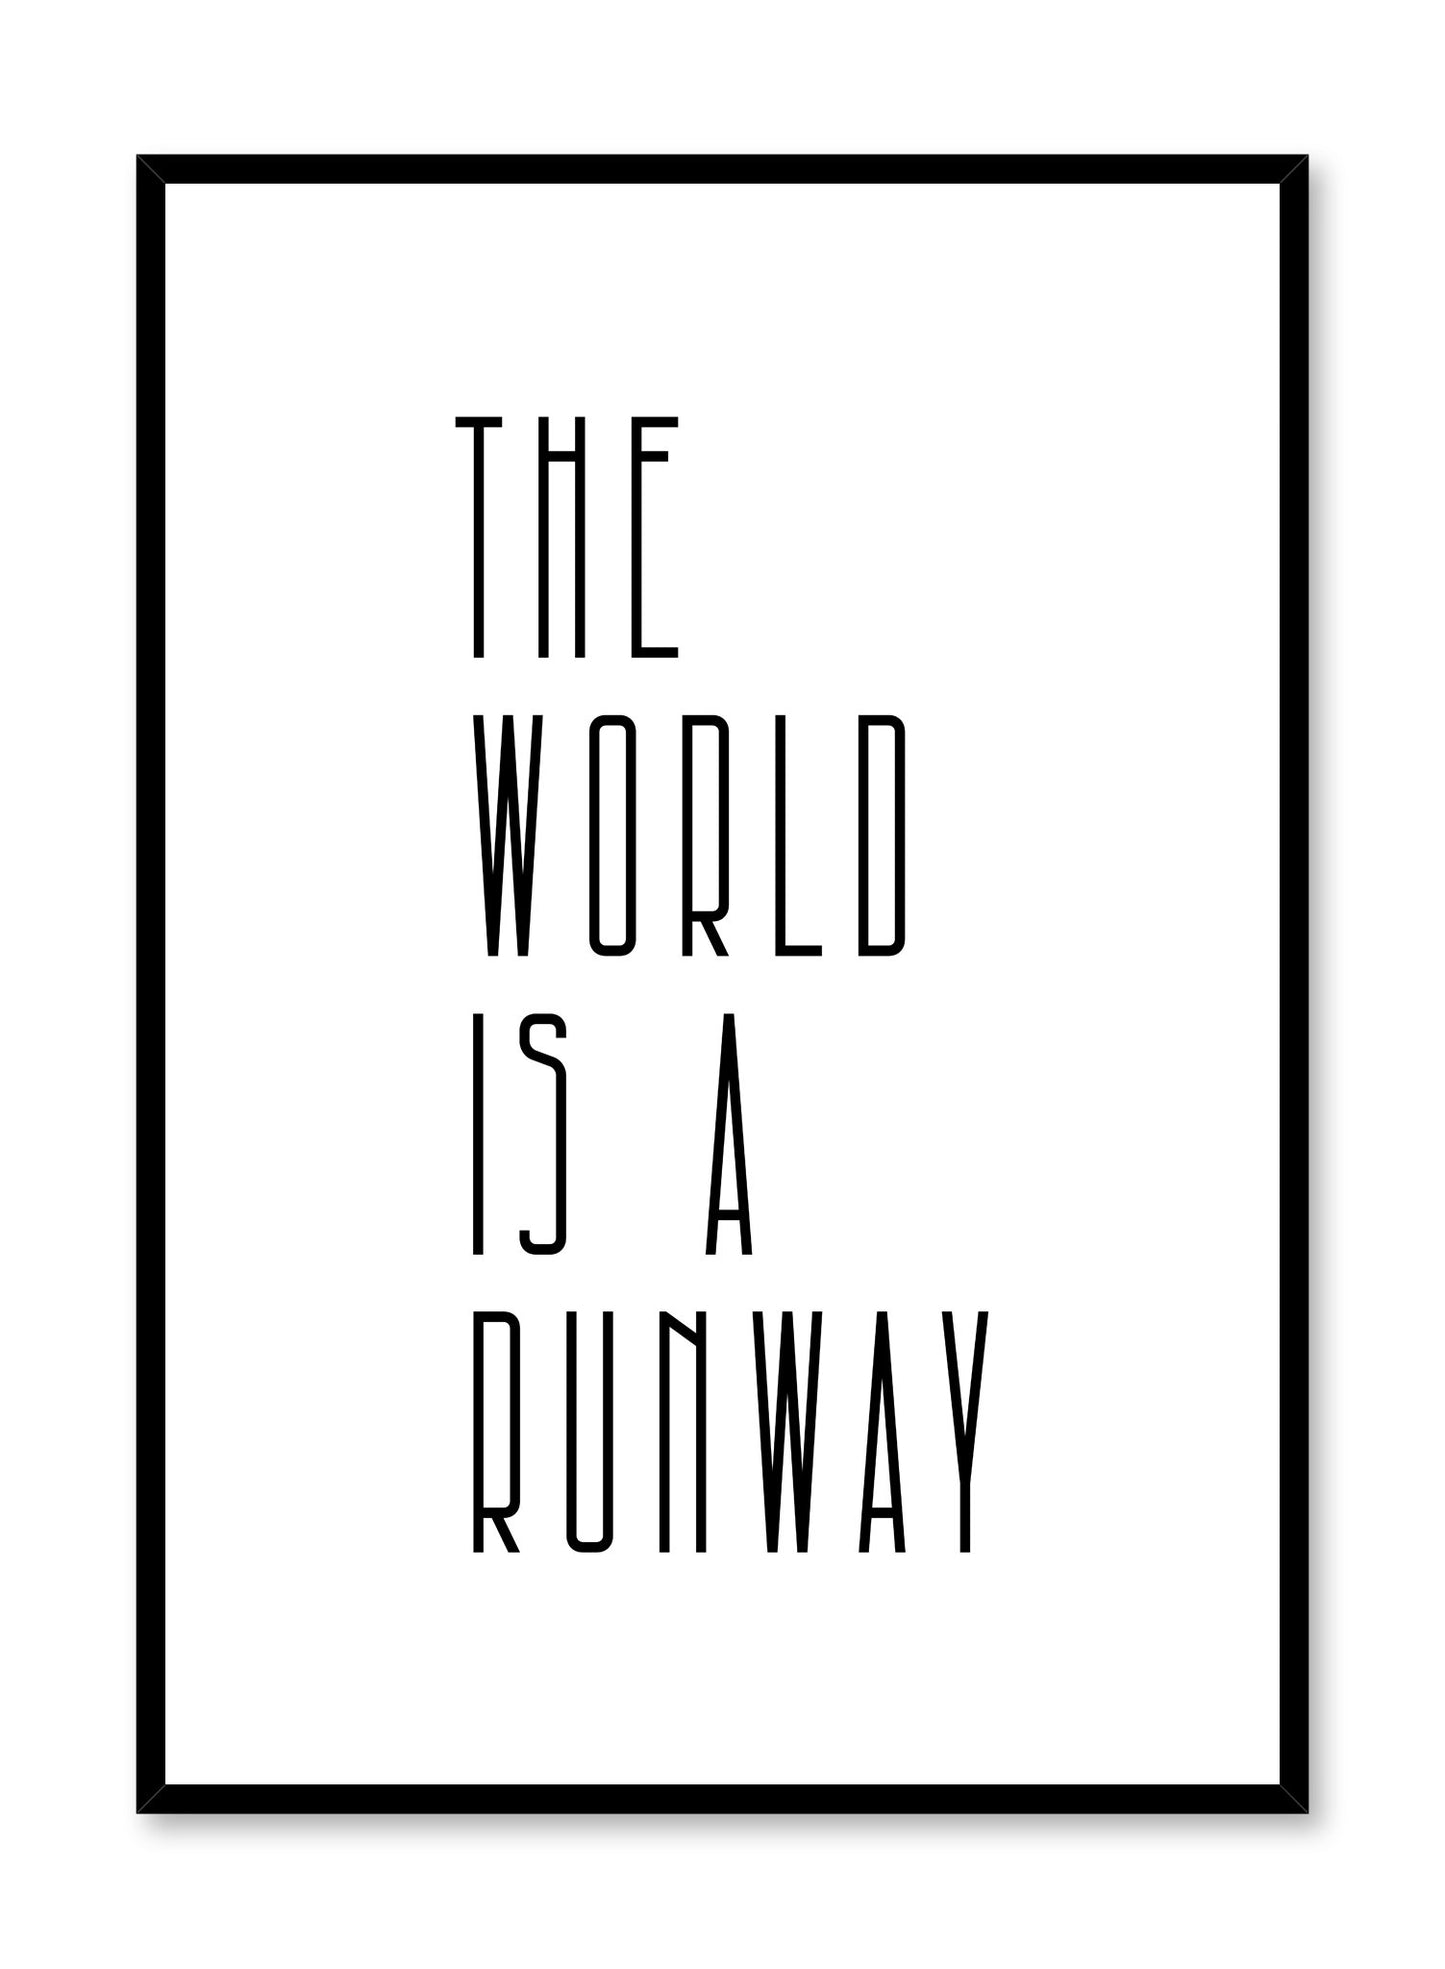 Typography poster by Opposite Wall with quote "the world is a runway"